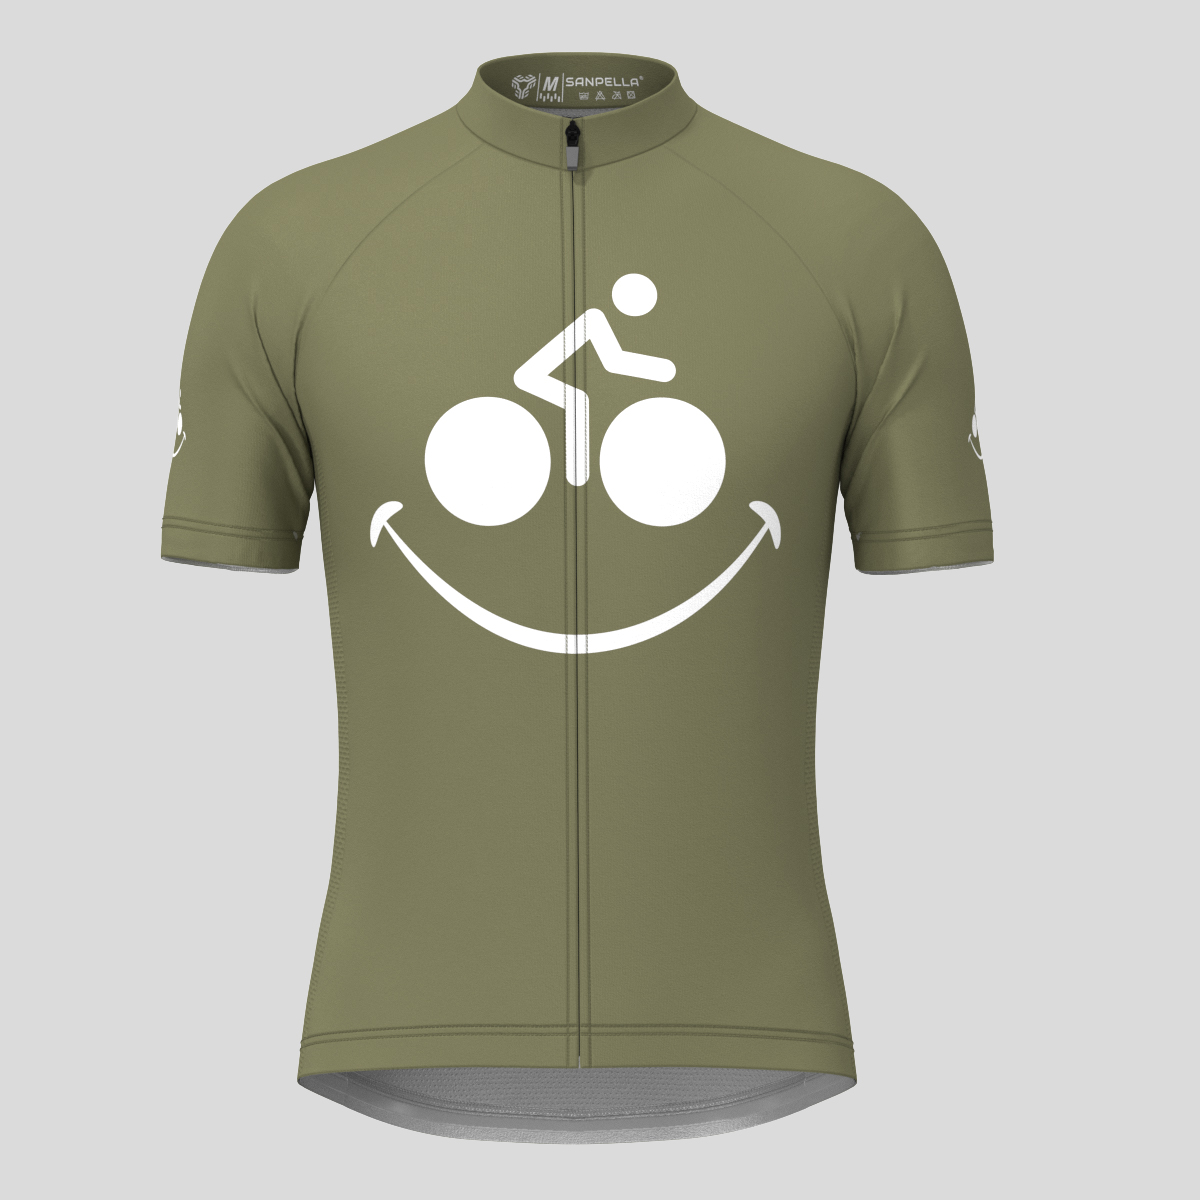 Bike Smile Men's Cycling Jersey - Olive